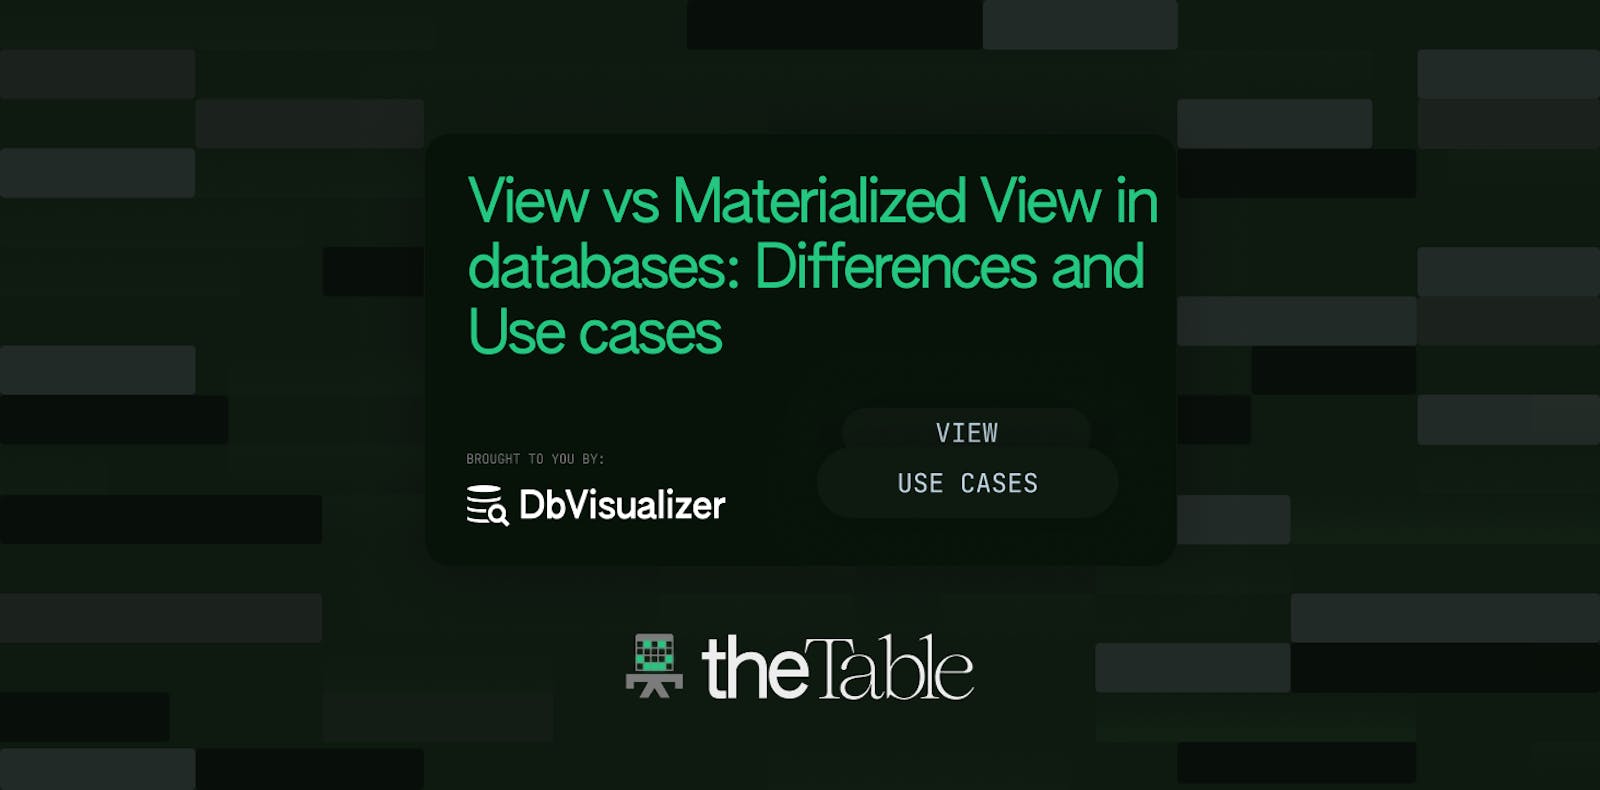 View vs Materialized View in databases: Differences and Use cases